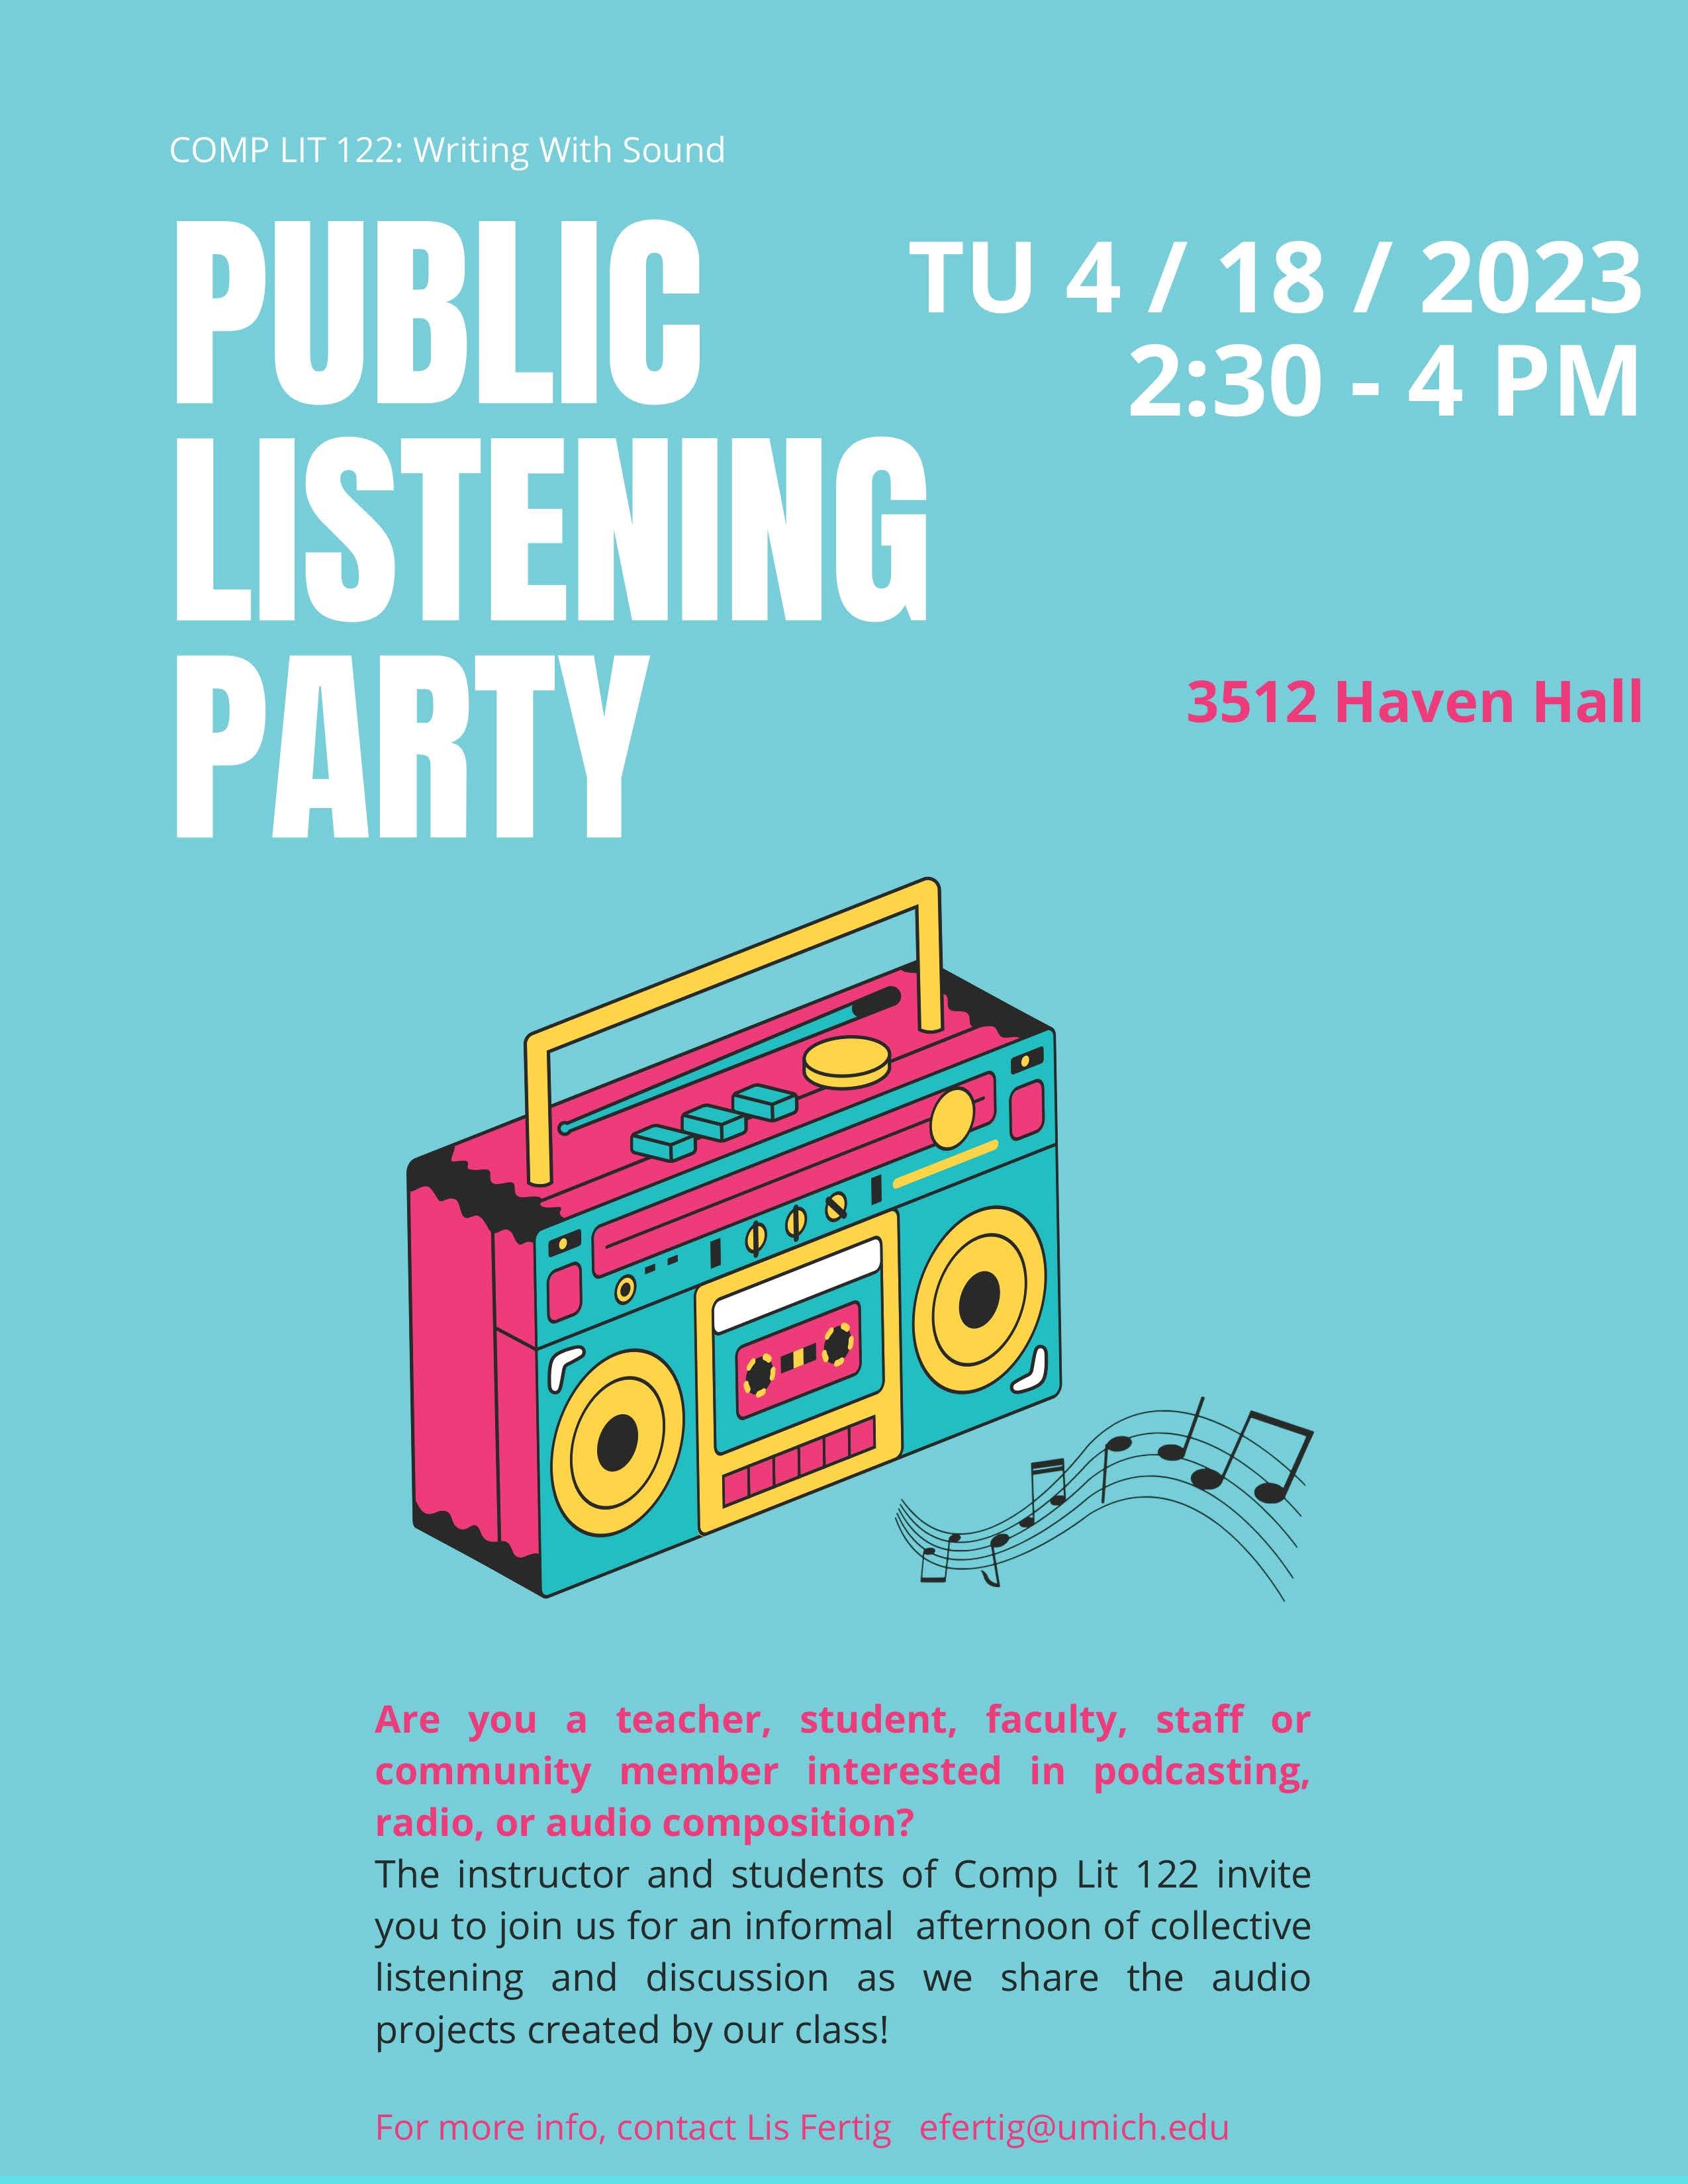 Poster with text, "Comp Lit 122: Writing with Sound Public Listening Party, Tuesday 4/18/2023, 2:30 - 4 PM in 3512 Haven Hall. Are you a teacher, student, faculty, staff or community member interesting in podcasting, radio, or audio composition? The instructor and students of Comp Lit 122 invite you to join us for an informal afternoon of collective listening and discussion as we share the audio projects created by our class!"